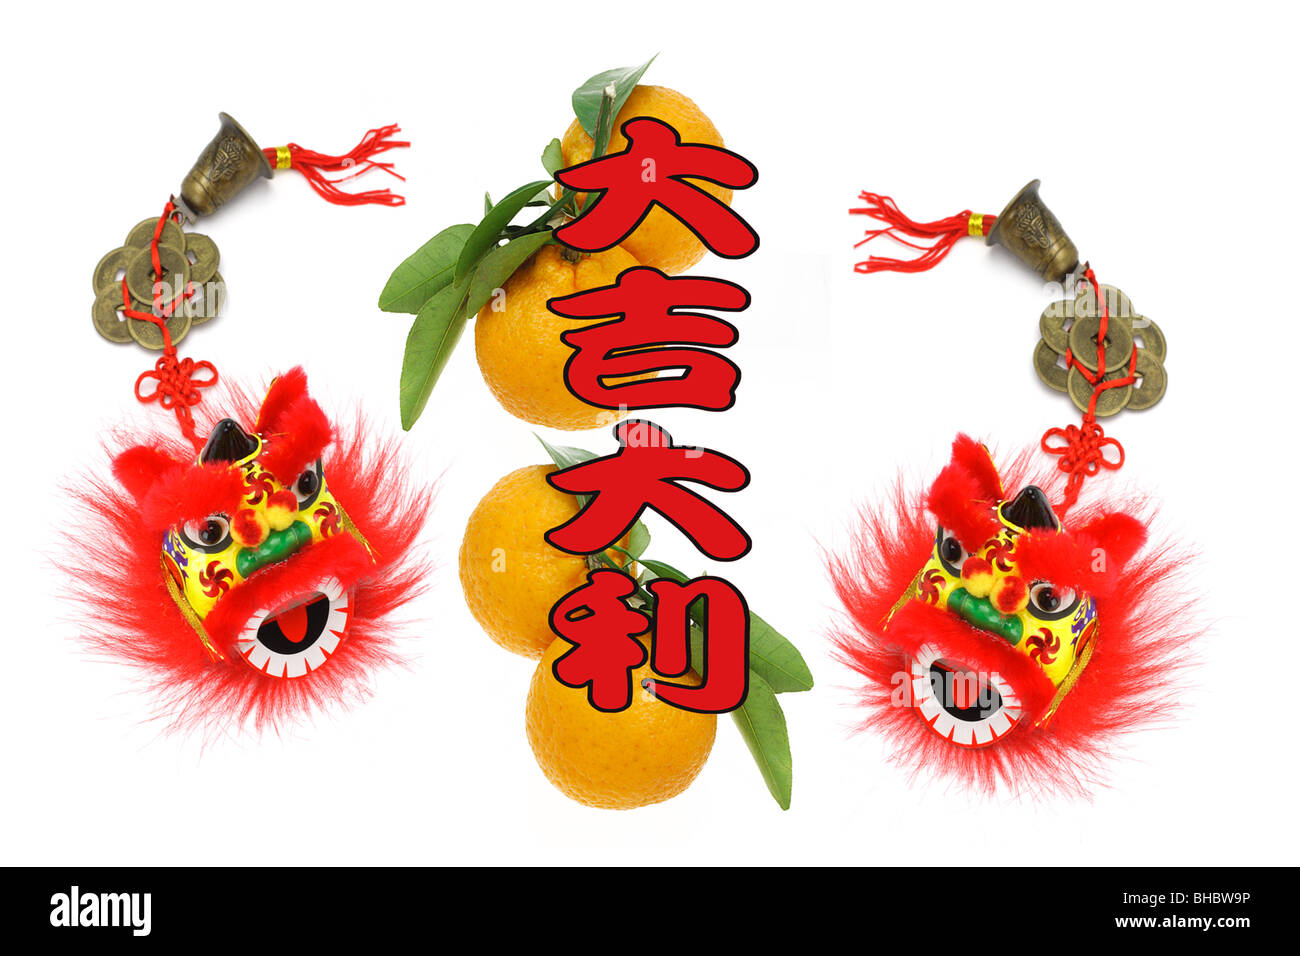 Chinese lunar new year greetings with lion head ornaments and oranges Stock Photo